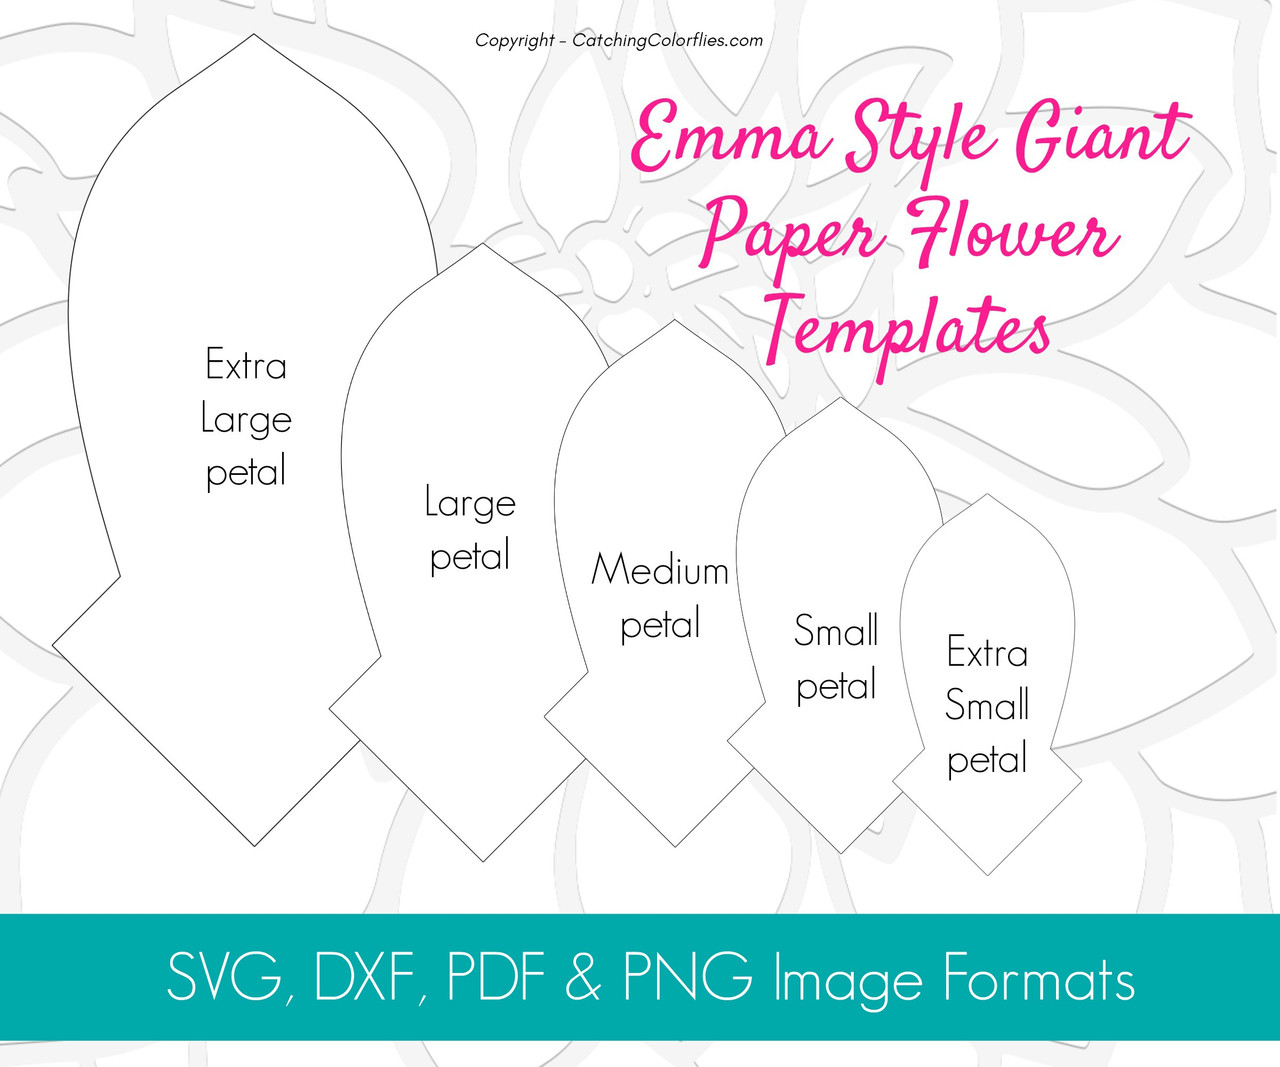 Giant Dahlia Flower Template Emma Style Catching Colorflies